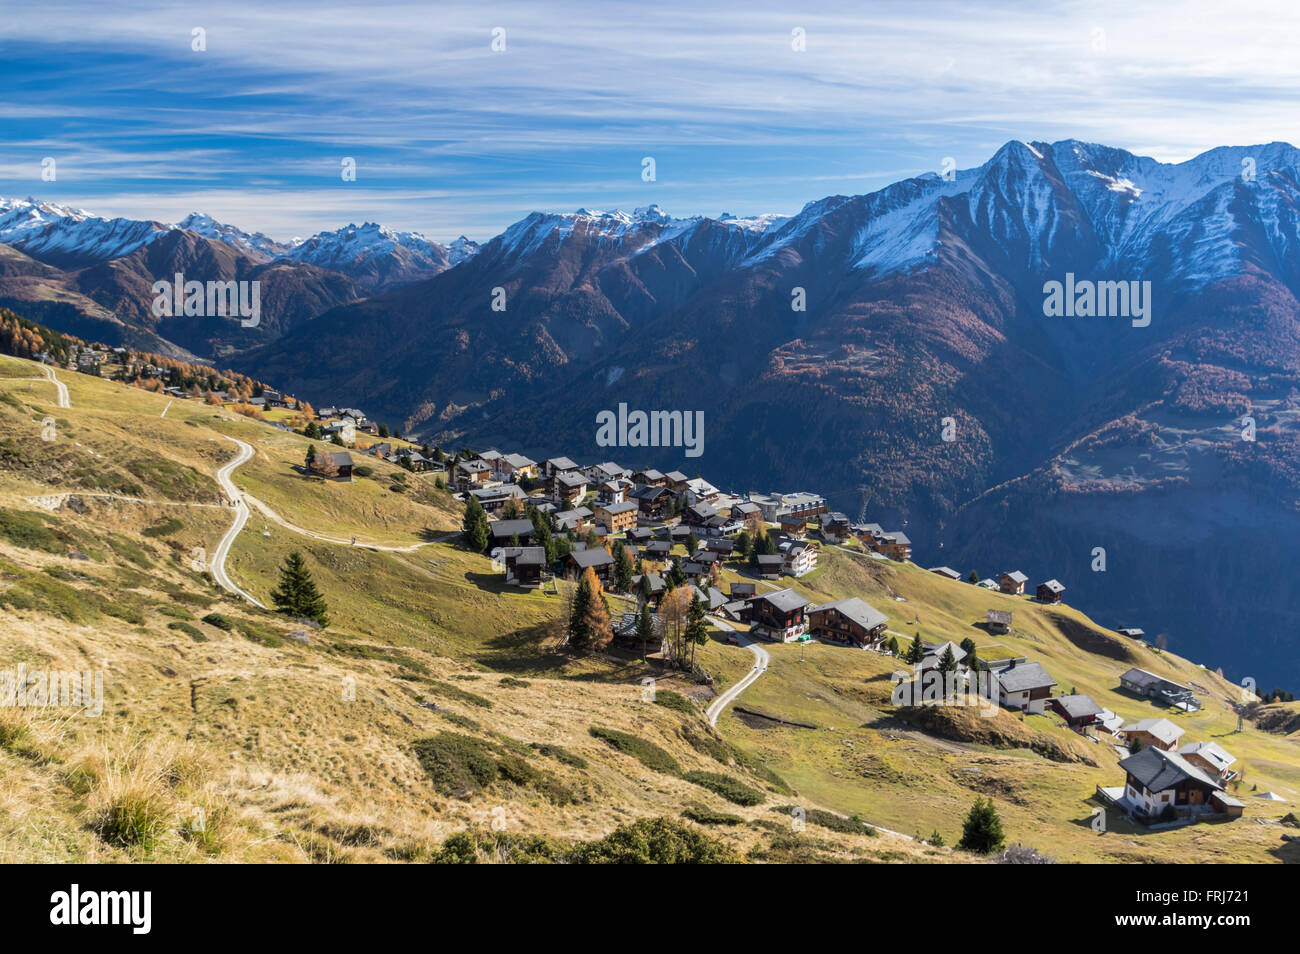 View of the village of Riederalp and surrounding mountains in the Alps. Valais/Wallis, Switzerland. Sunny autumn day. Stock Photo